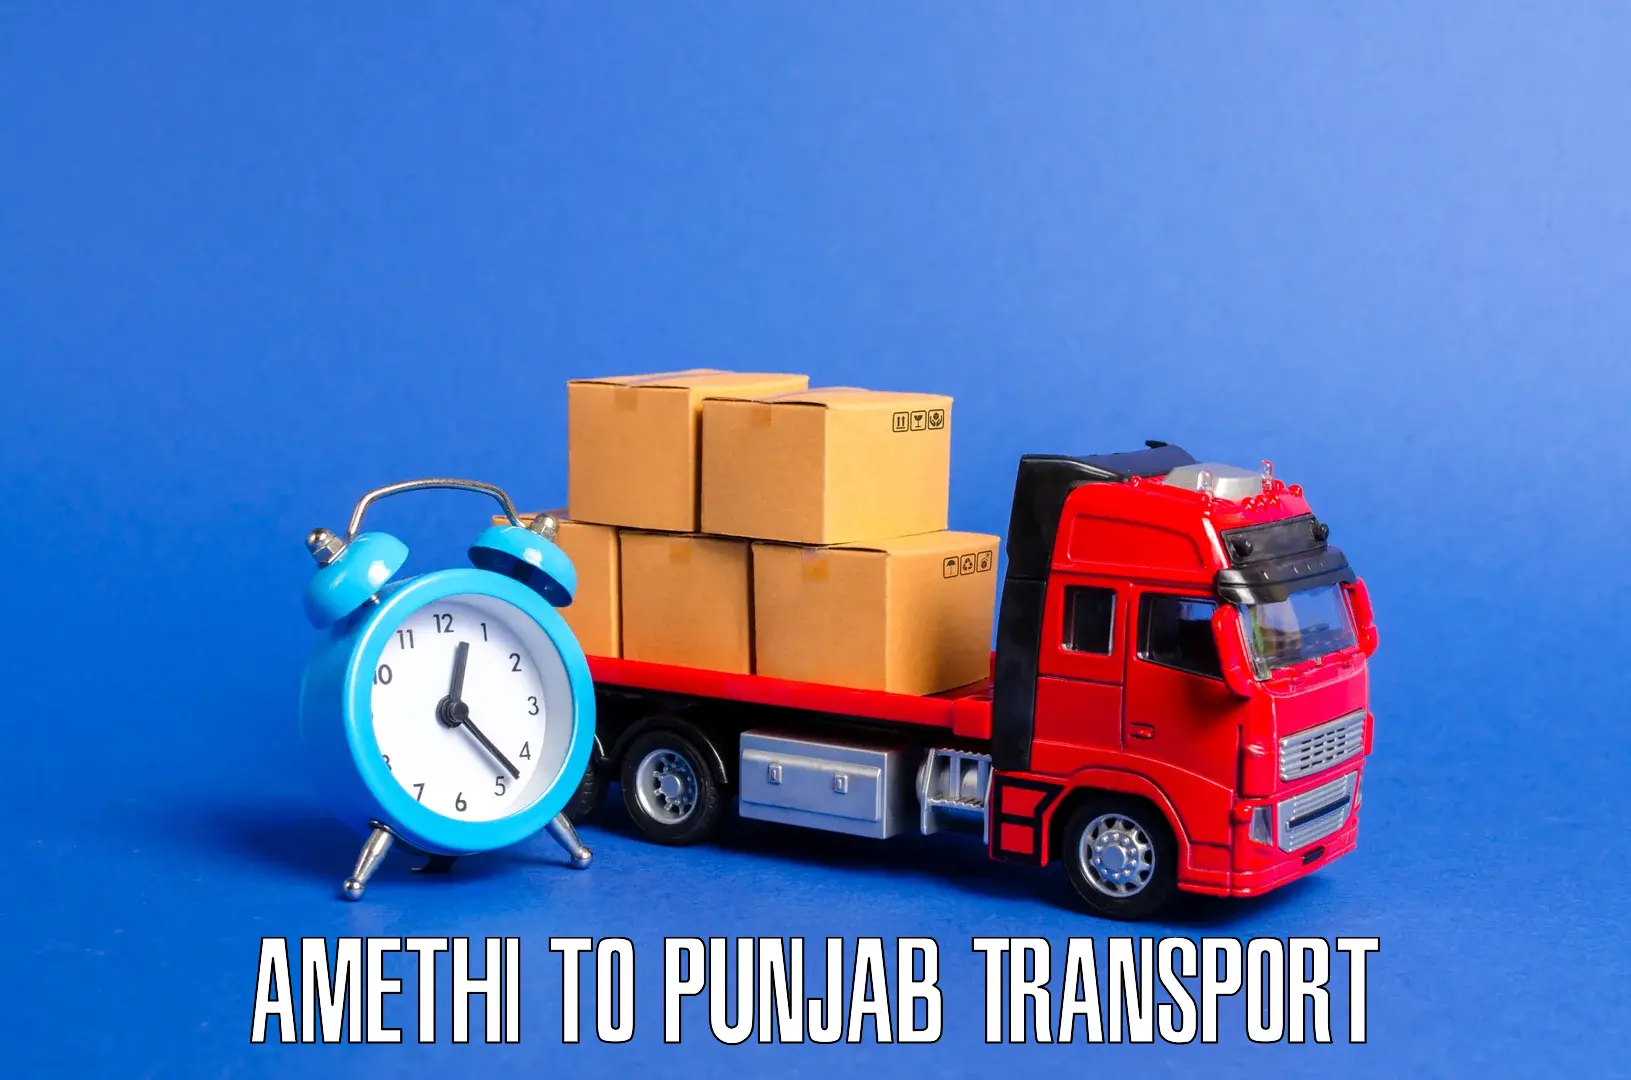 Goods delivery service Amethi to Dinanagar